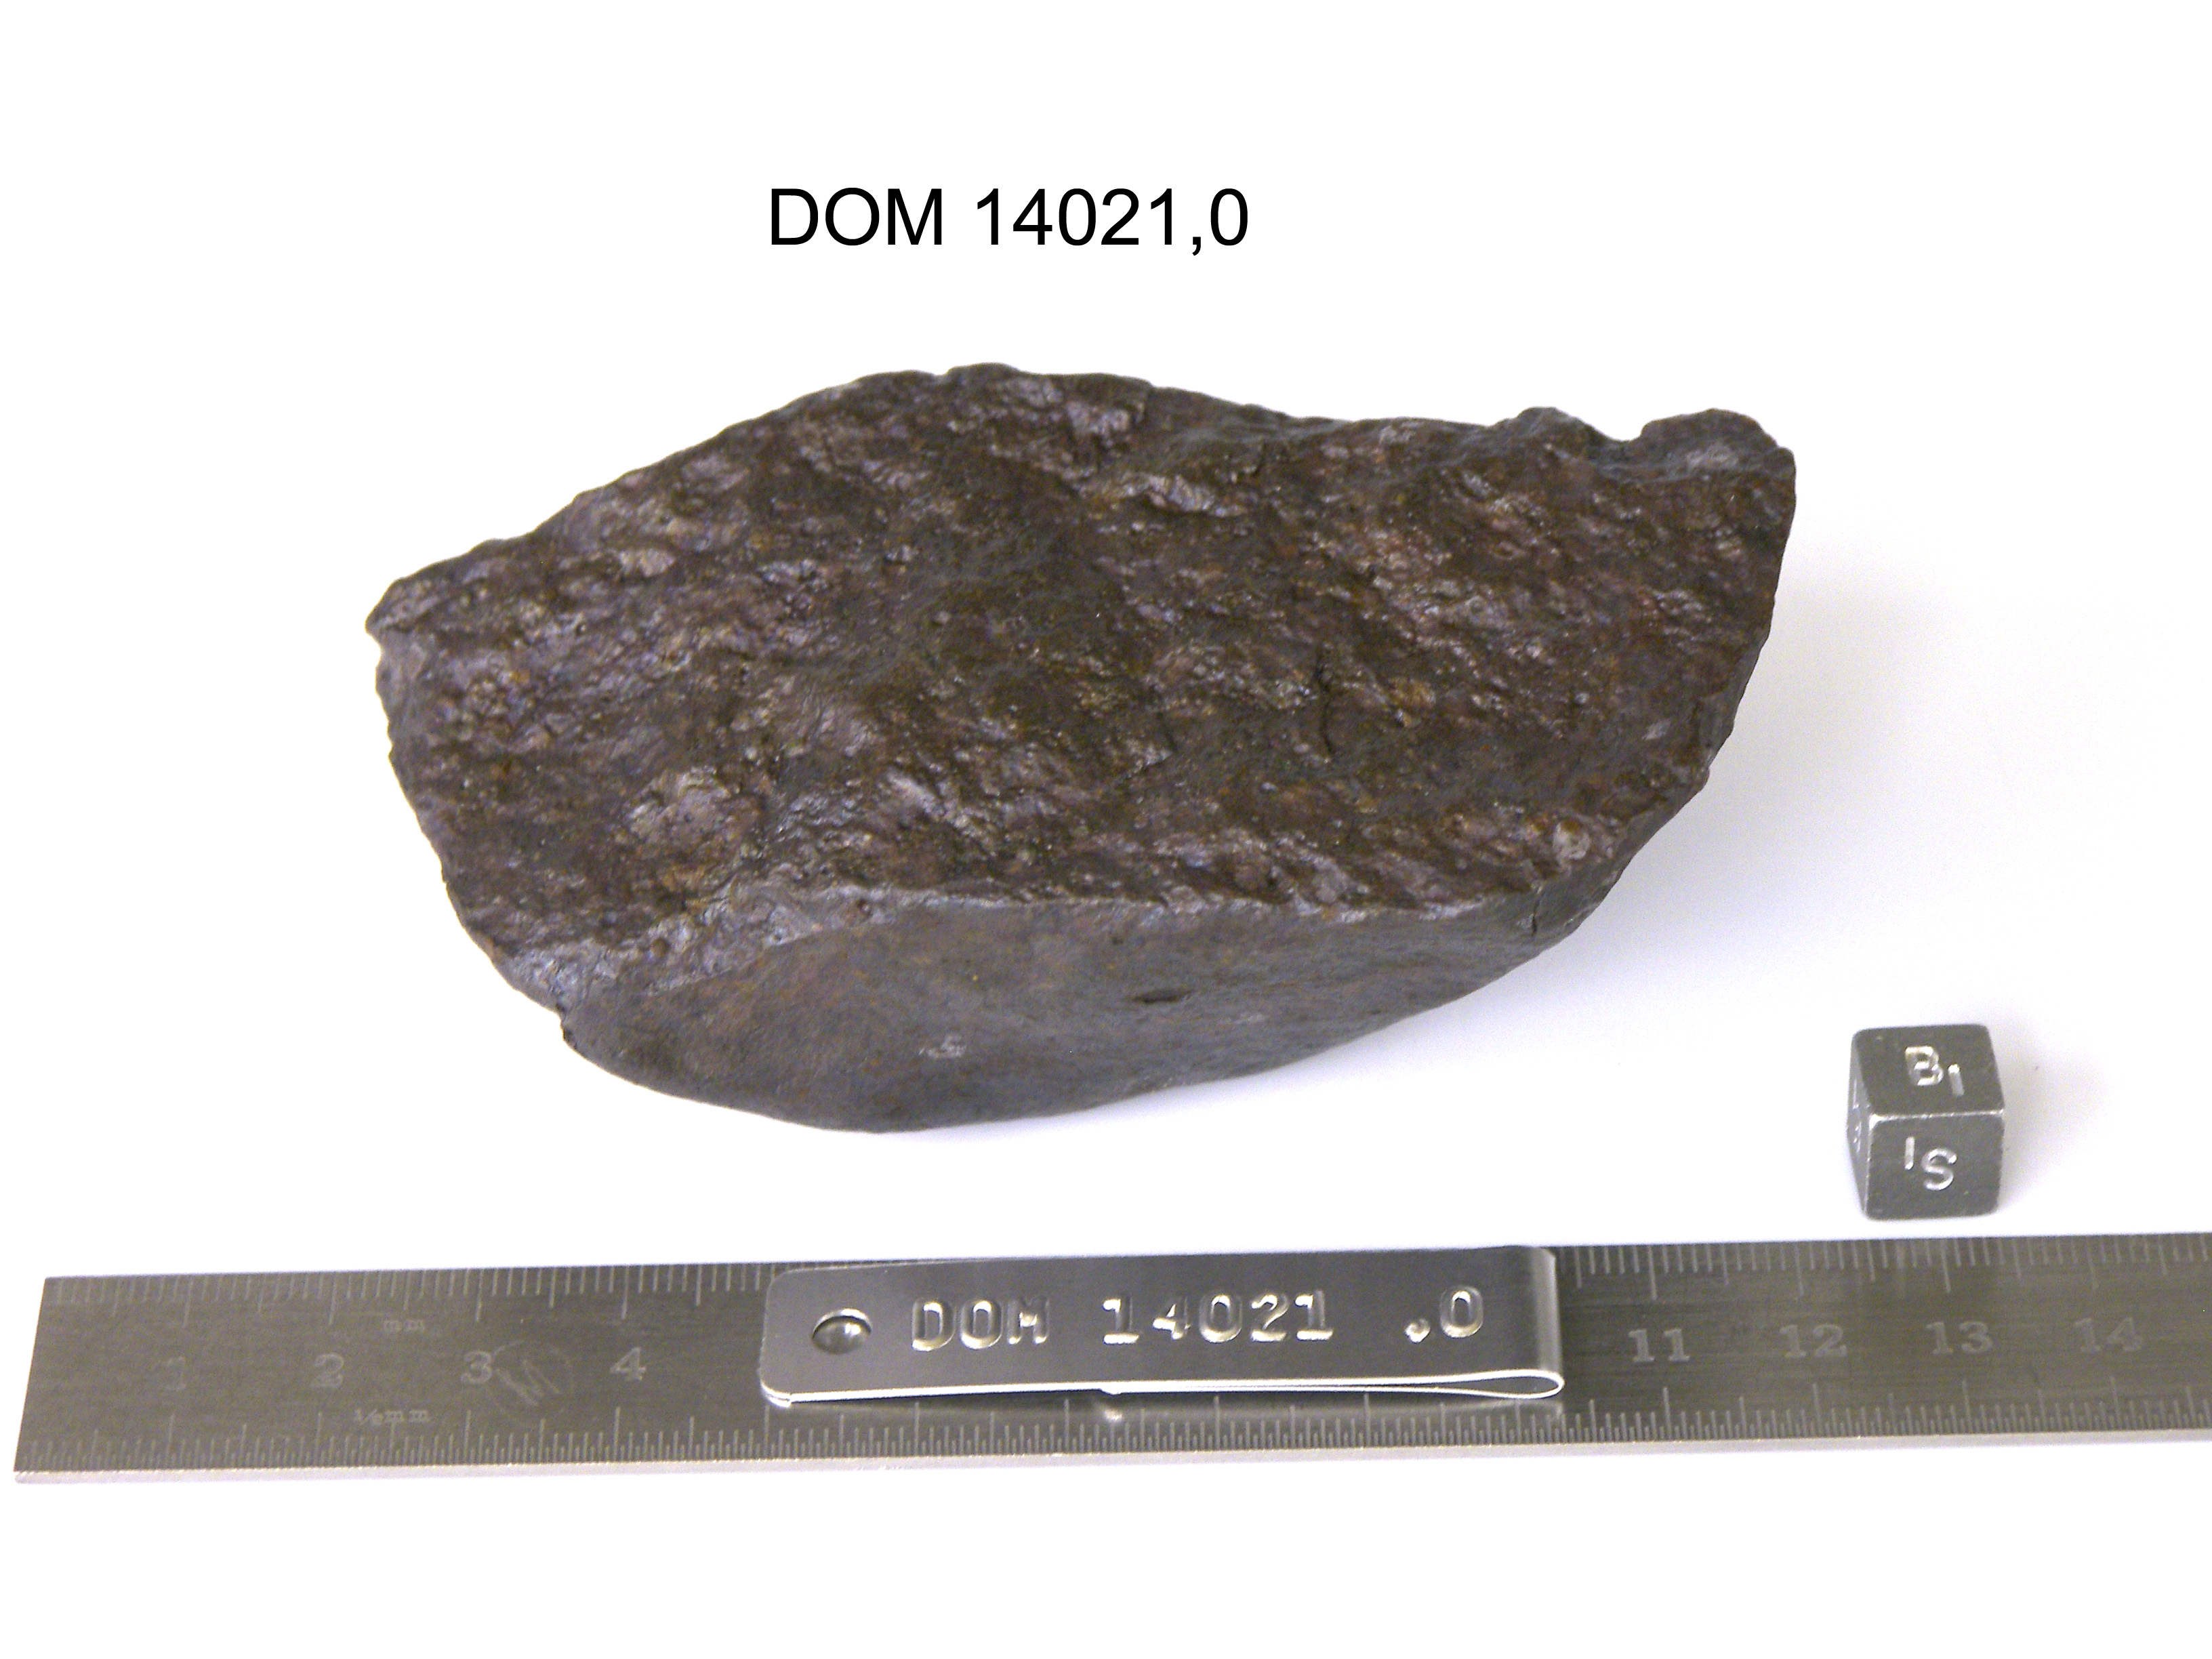 Lab Photo of Sample DOM 14021 Displaying South Orientation